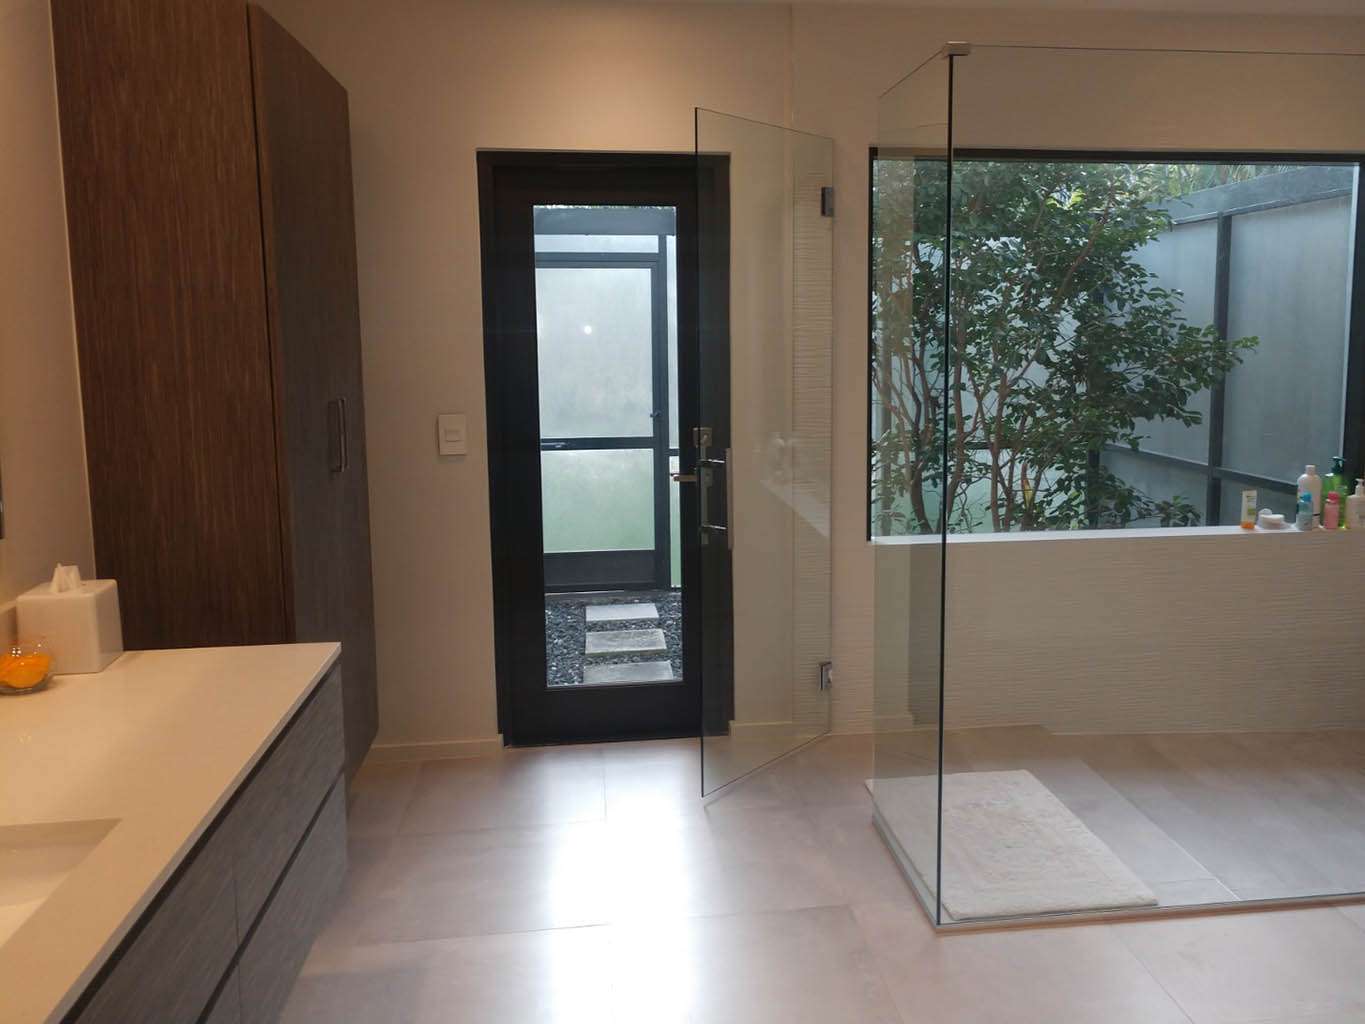 Master bath remodel with floating vanities, a large shower enclosure and freestanding bathtub